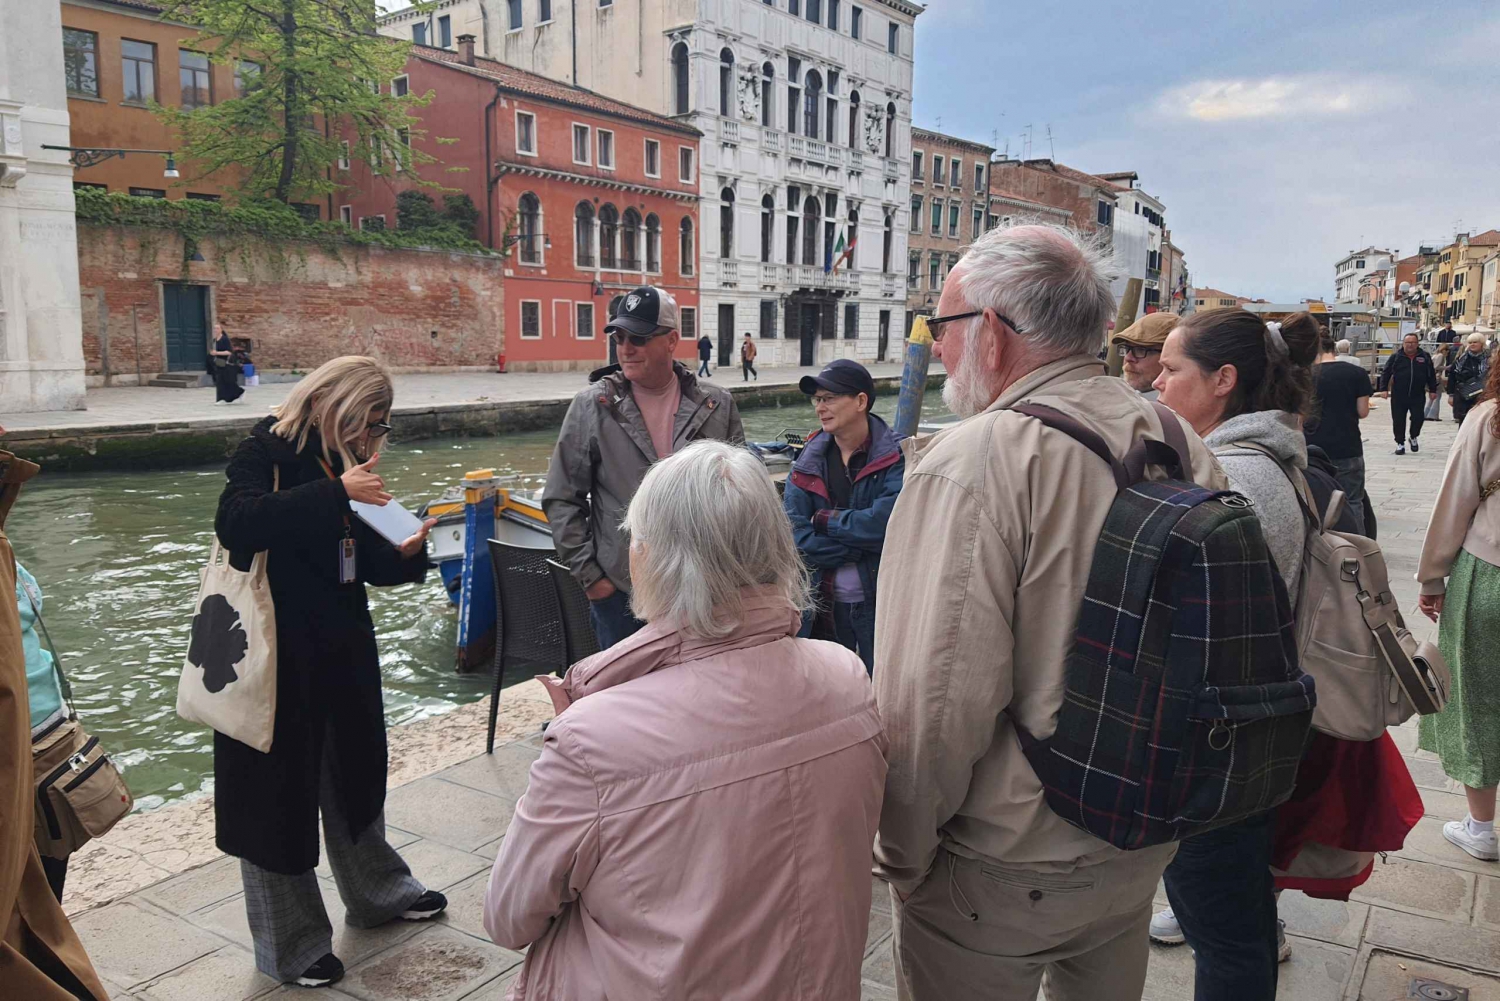 Venice: City Wonders Group Walking Tour with a Guide